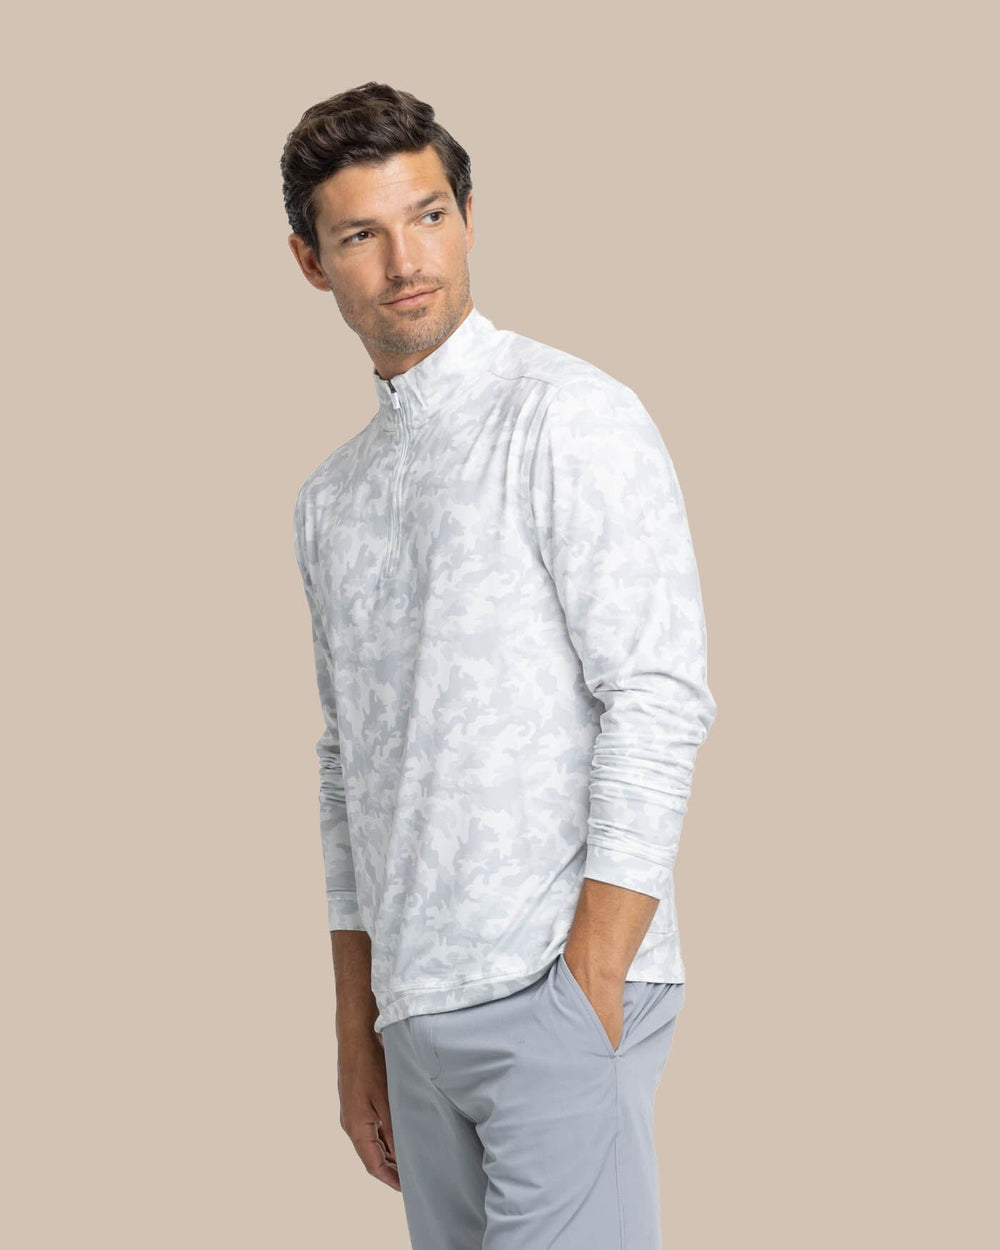 The front view of the Southern Tide Island Camo Print Cruiser Quarter Zip by Southern Tide - Classic White